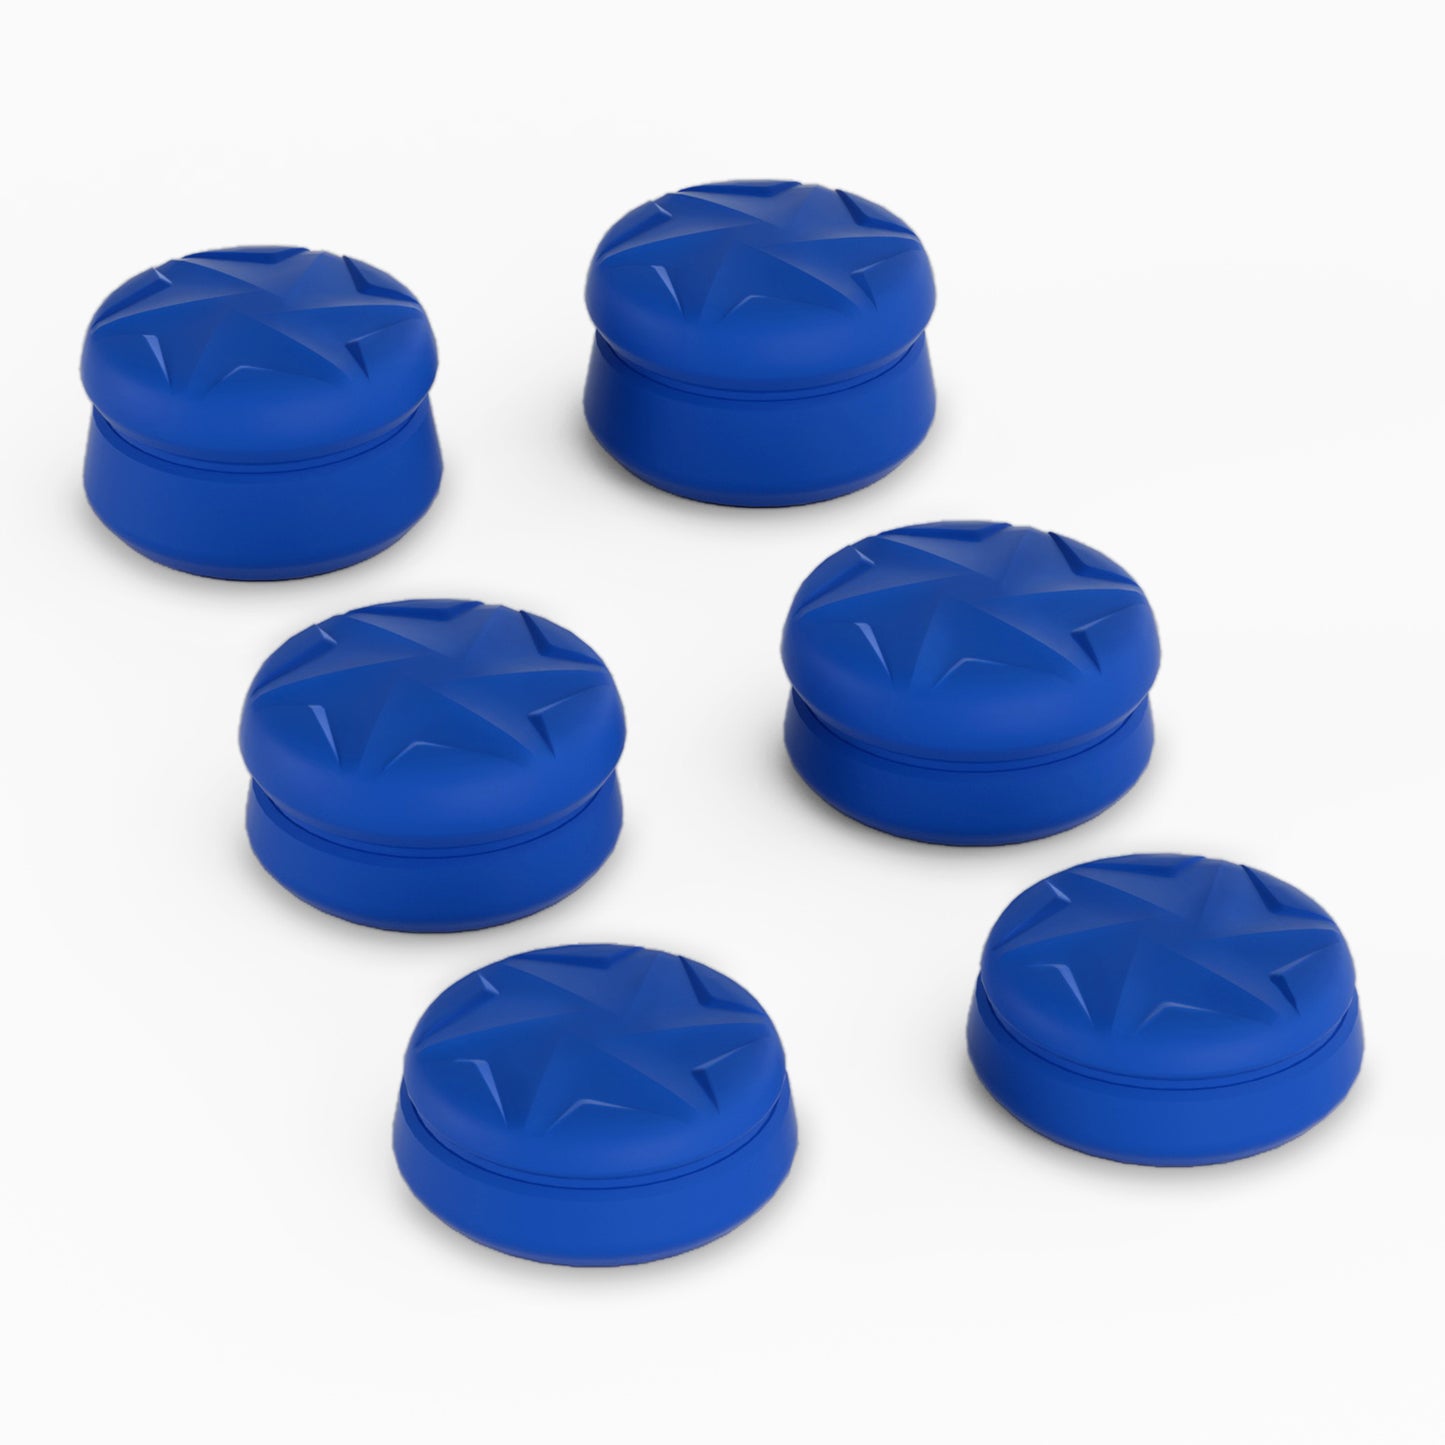 PlayVital 3 Height Razor Thumbs Cushion Caps Thumb Grips for ps5, for ps4, Thumbstick Grip Cover for Xbox Core Wireless Controller, Thumb Grip Caps for Xbox One, Elite Series 2, for Switch Pro - Blue - PJM3060 PlayVital